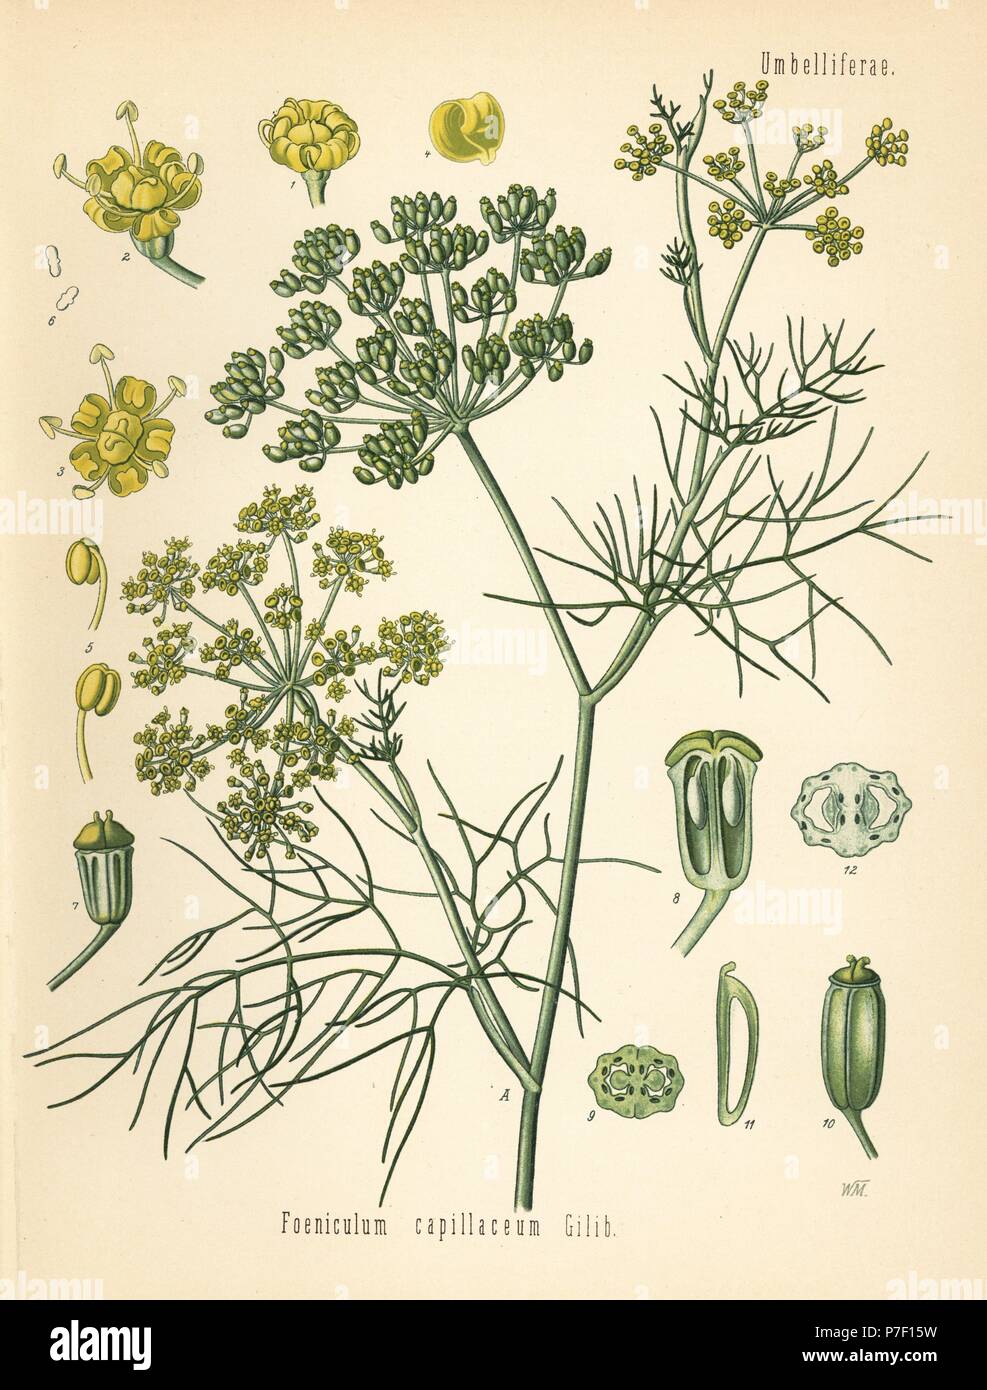 Fennel, Foeniculum vulgare (Foeniculum capillaceum). Chromolithograph after a botanical illustration by Walther Muller from Hermann Adolph Koehler's Medicinal Plants, edited by Gustav Pabst, Koehler, Germany, 1887. Stock Photo